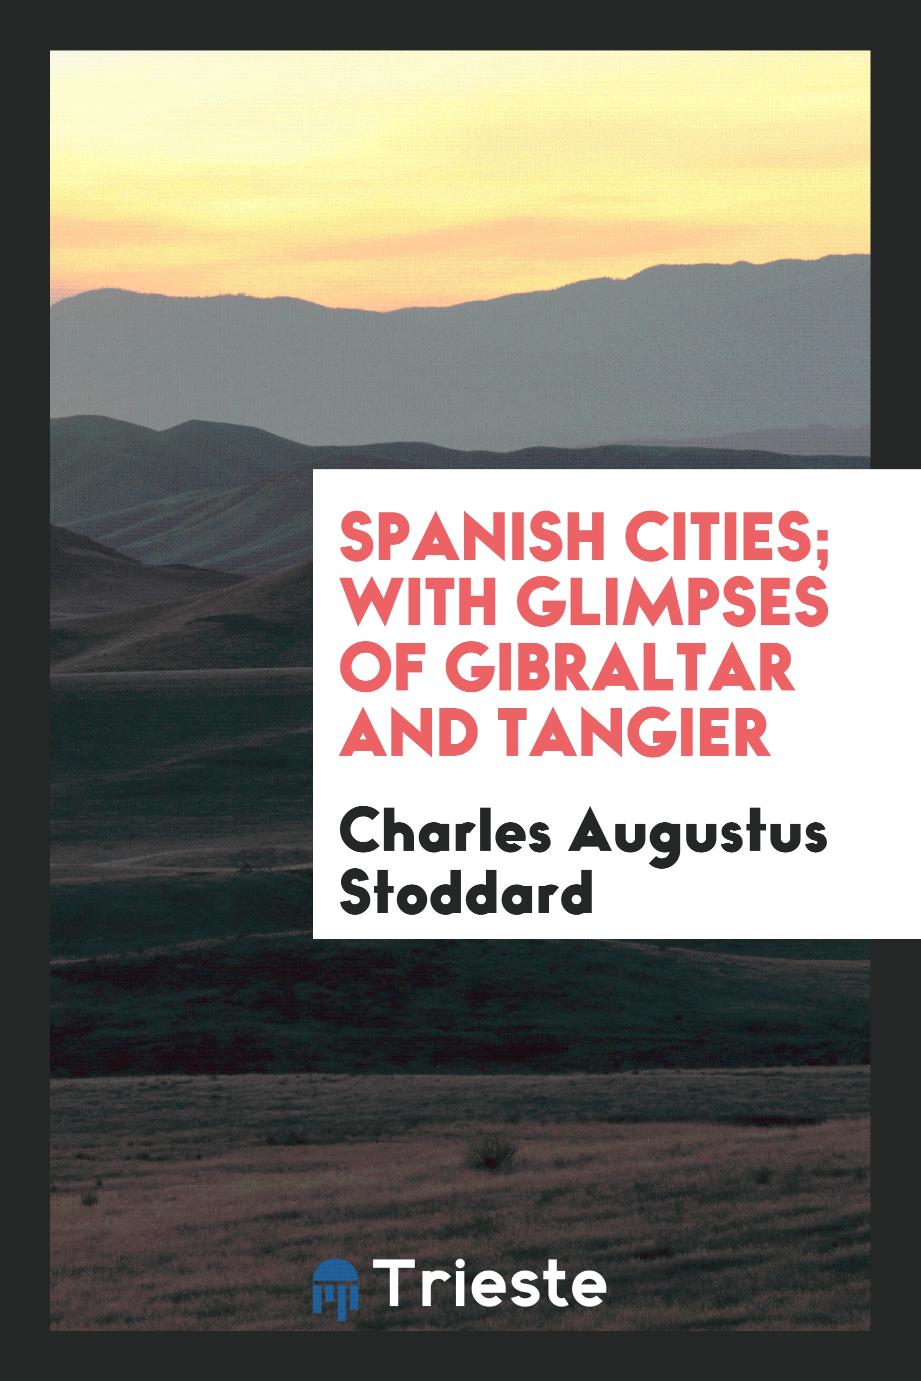 Spanish cities; with glimpses of Gibraltar and Tangier